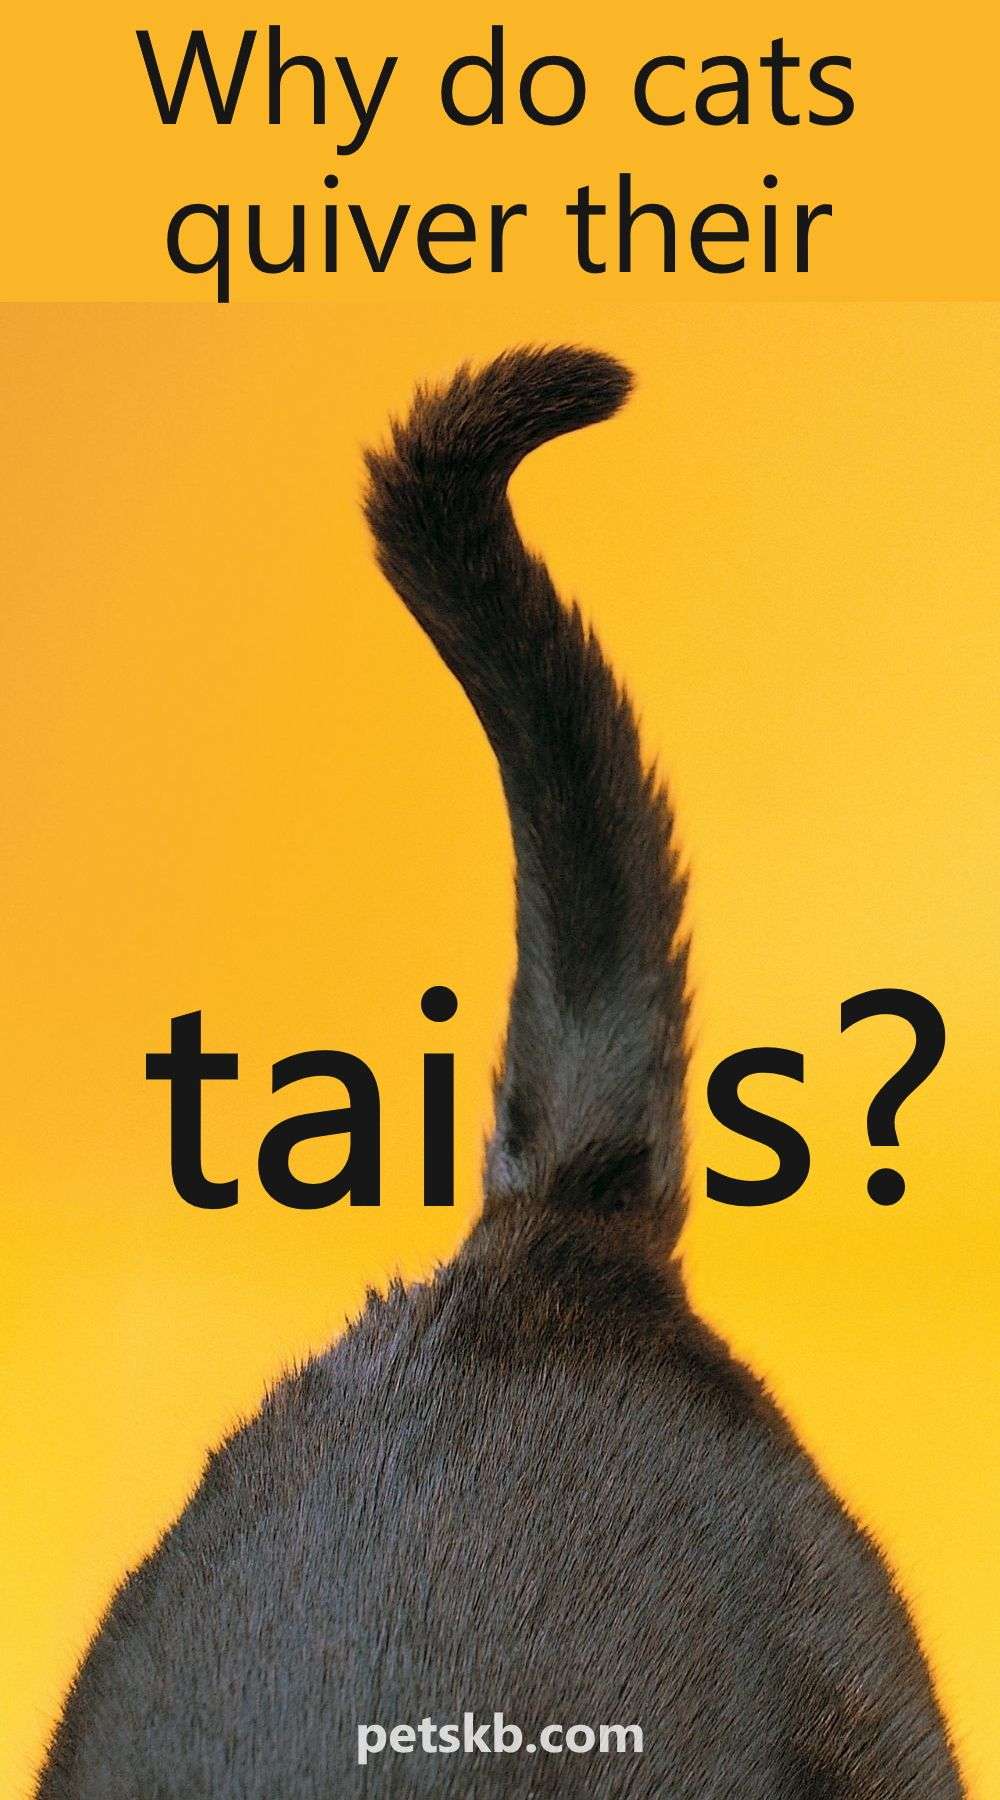 Why Do Cats Quiver Their Tails? in 2021